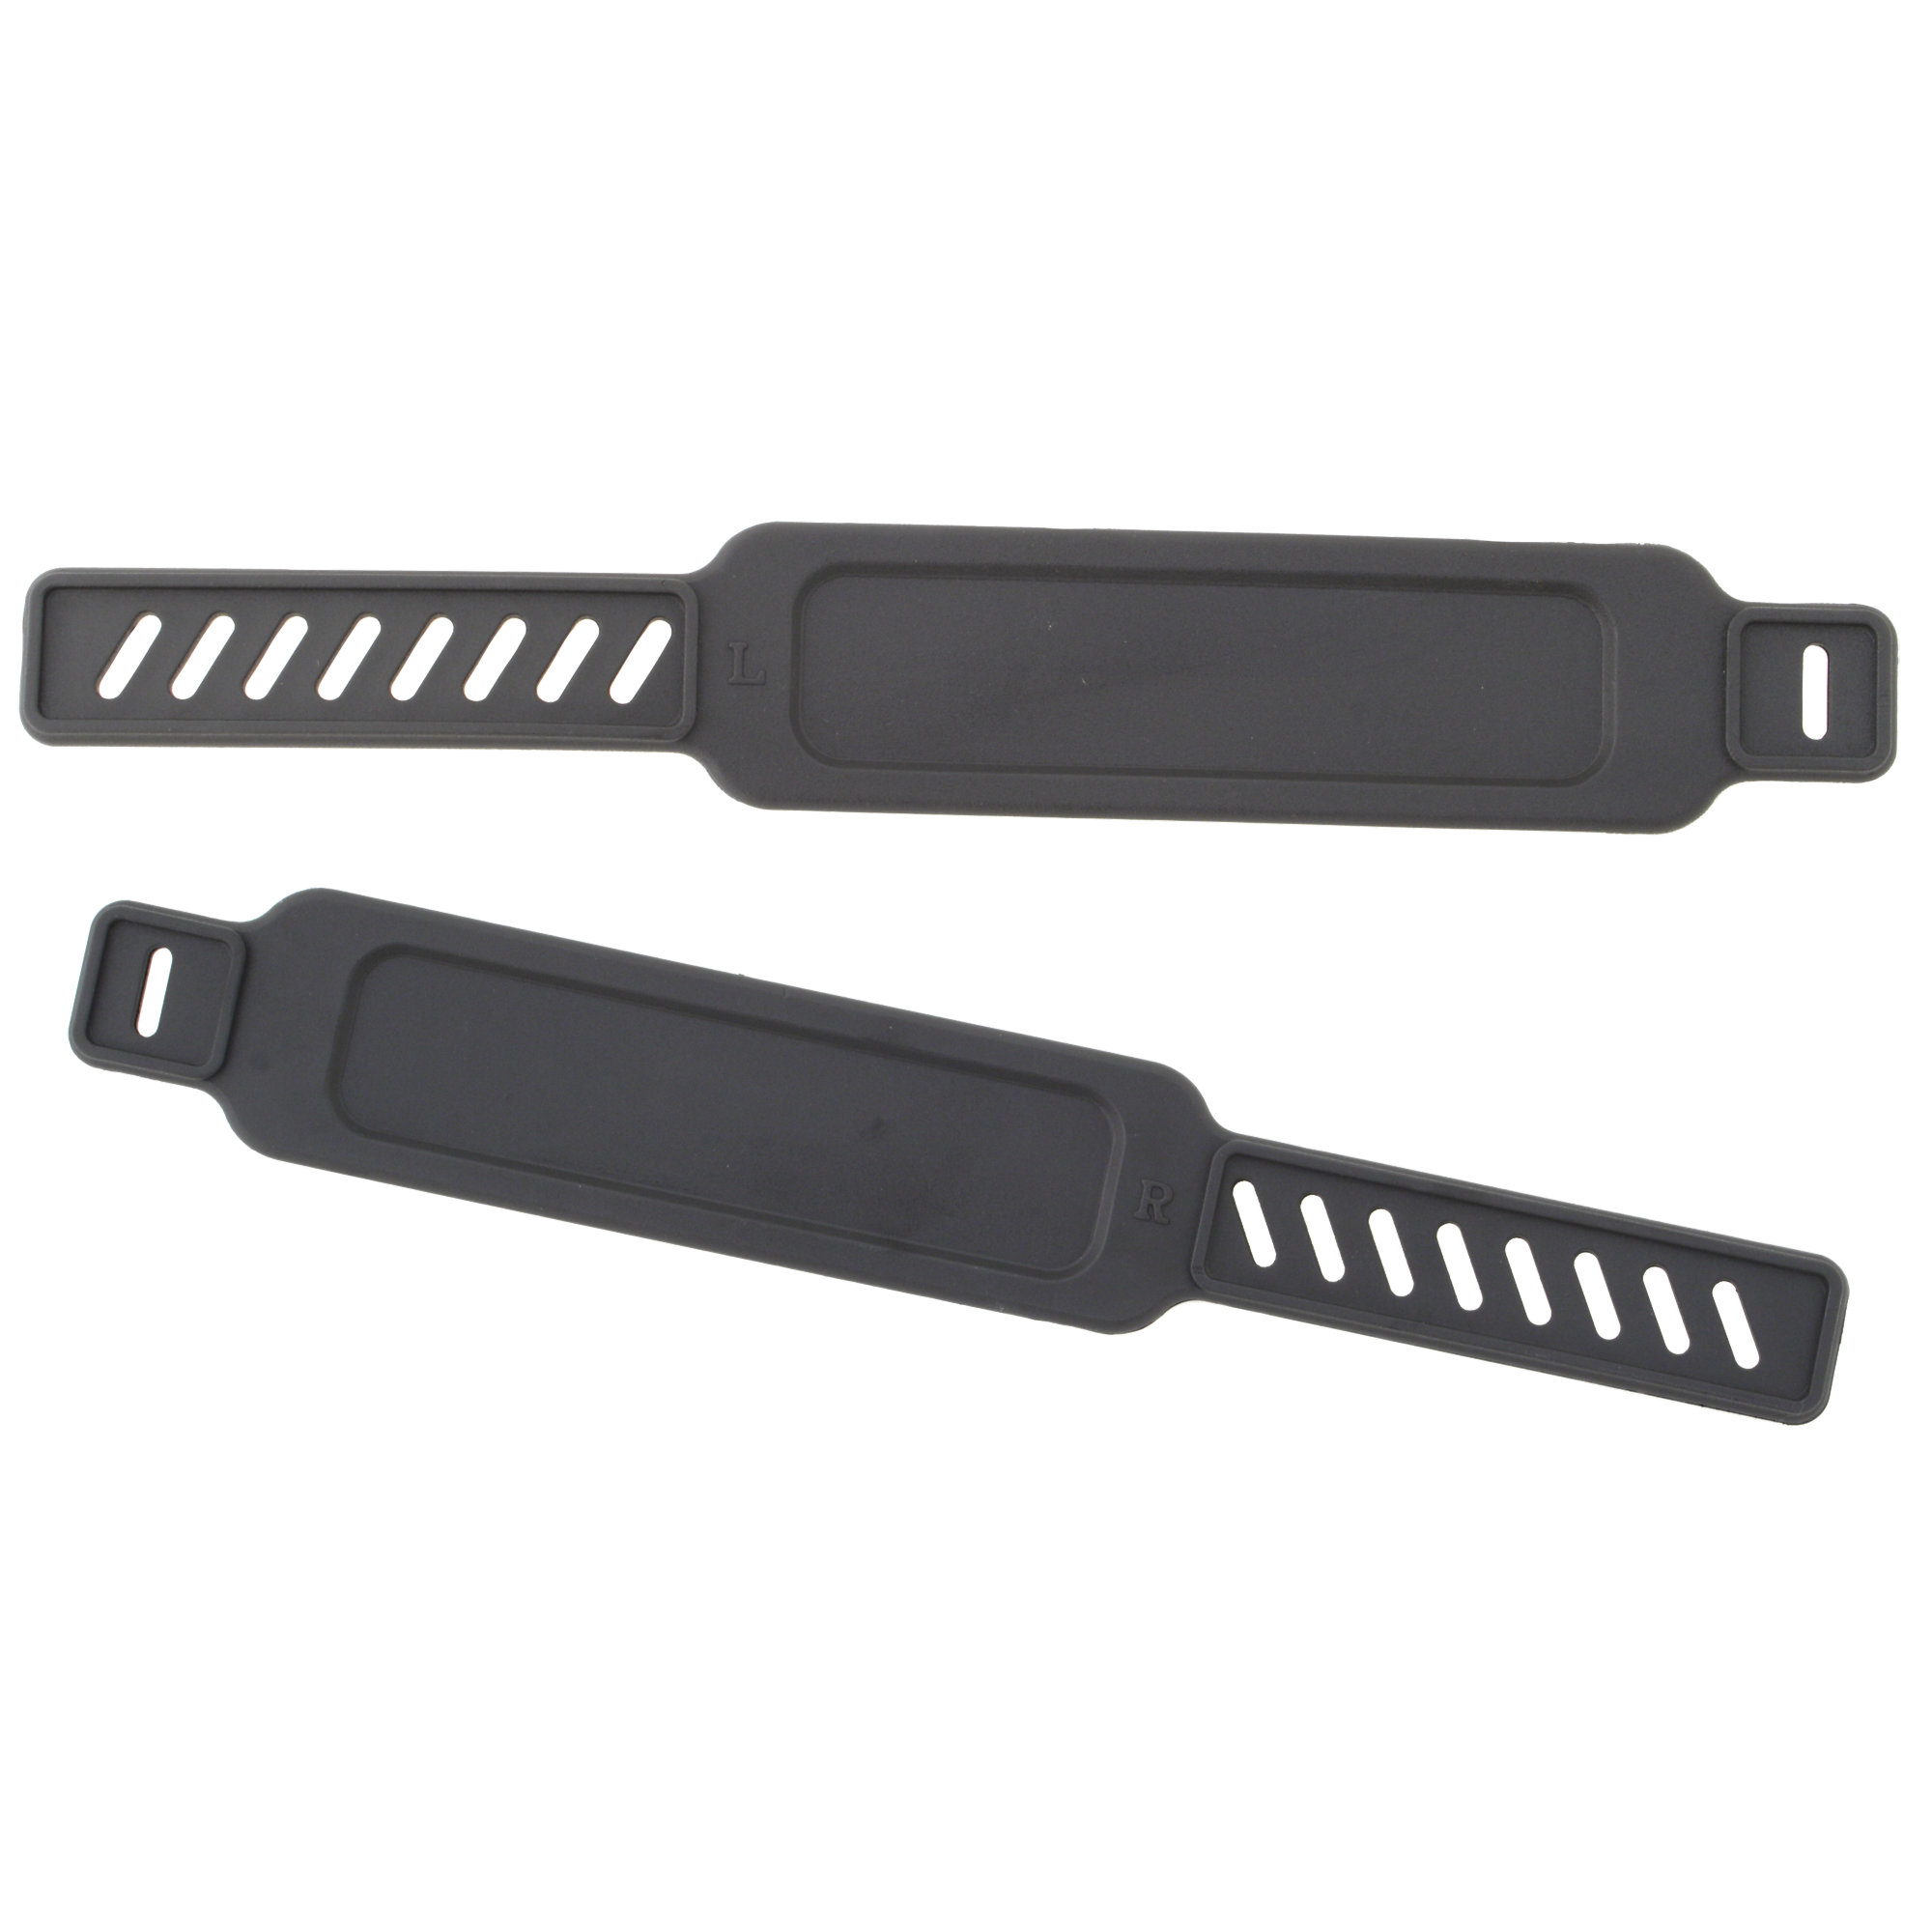 Pedal Straps for Stationary Bikes, 11 5/8", Pair, Fits LifeFitness and Other Bikes